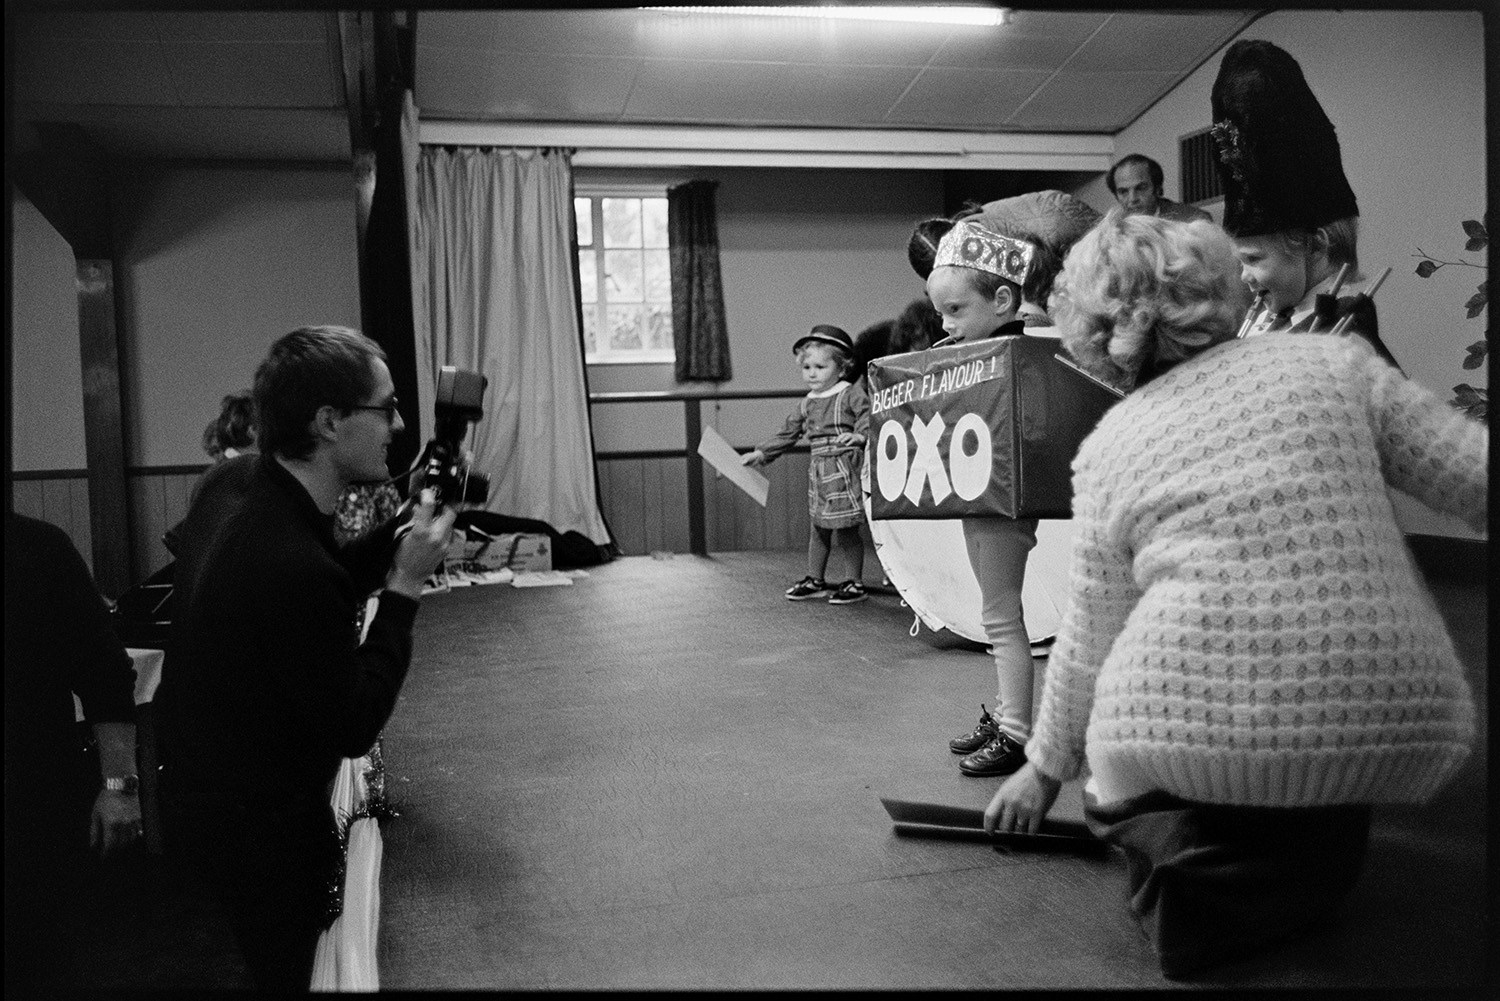 Fancy dress competition in village hall, spectators, queen and crown on cushion. 
[A man photographing young children taking part in a fancy dress competition for Dolton Carnival in Dolton Village Hall. The children are stood on the stage and one child is dressed as an Oxo cube.]